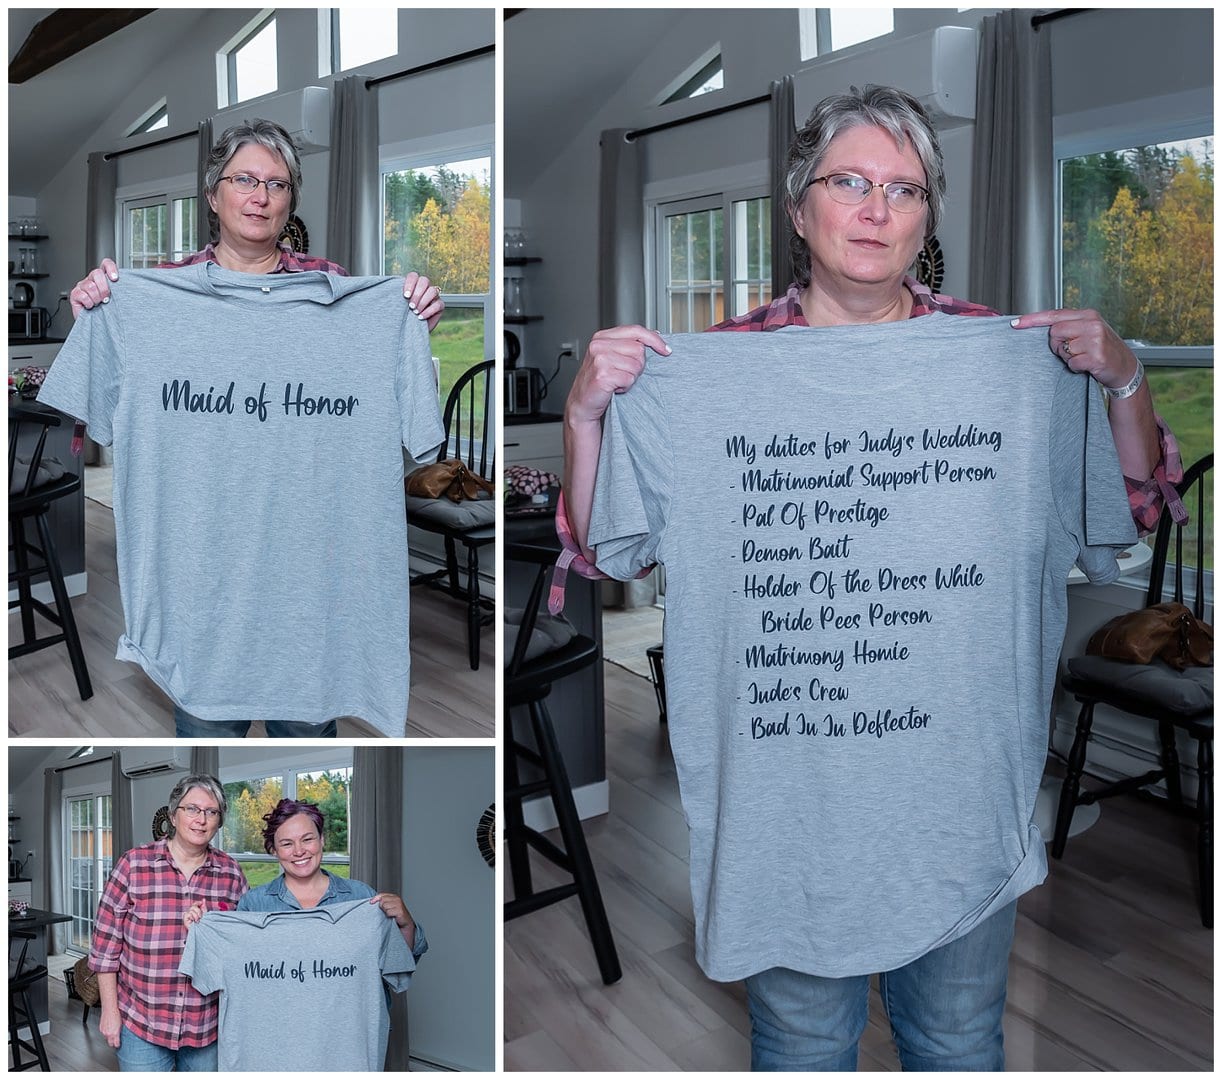 An awesome t-shirt with the responsibilities of a maid of honor written on it.